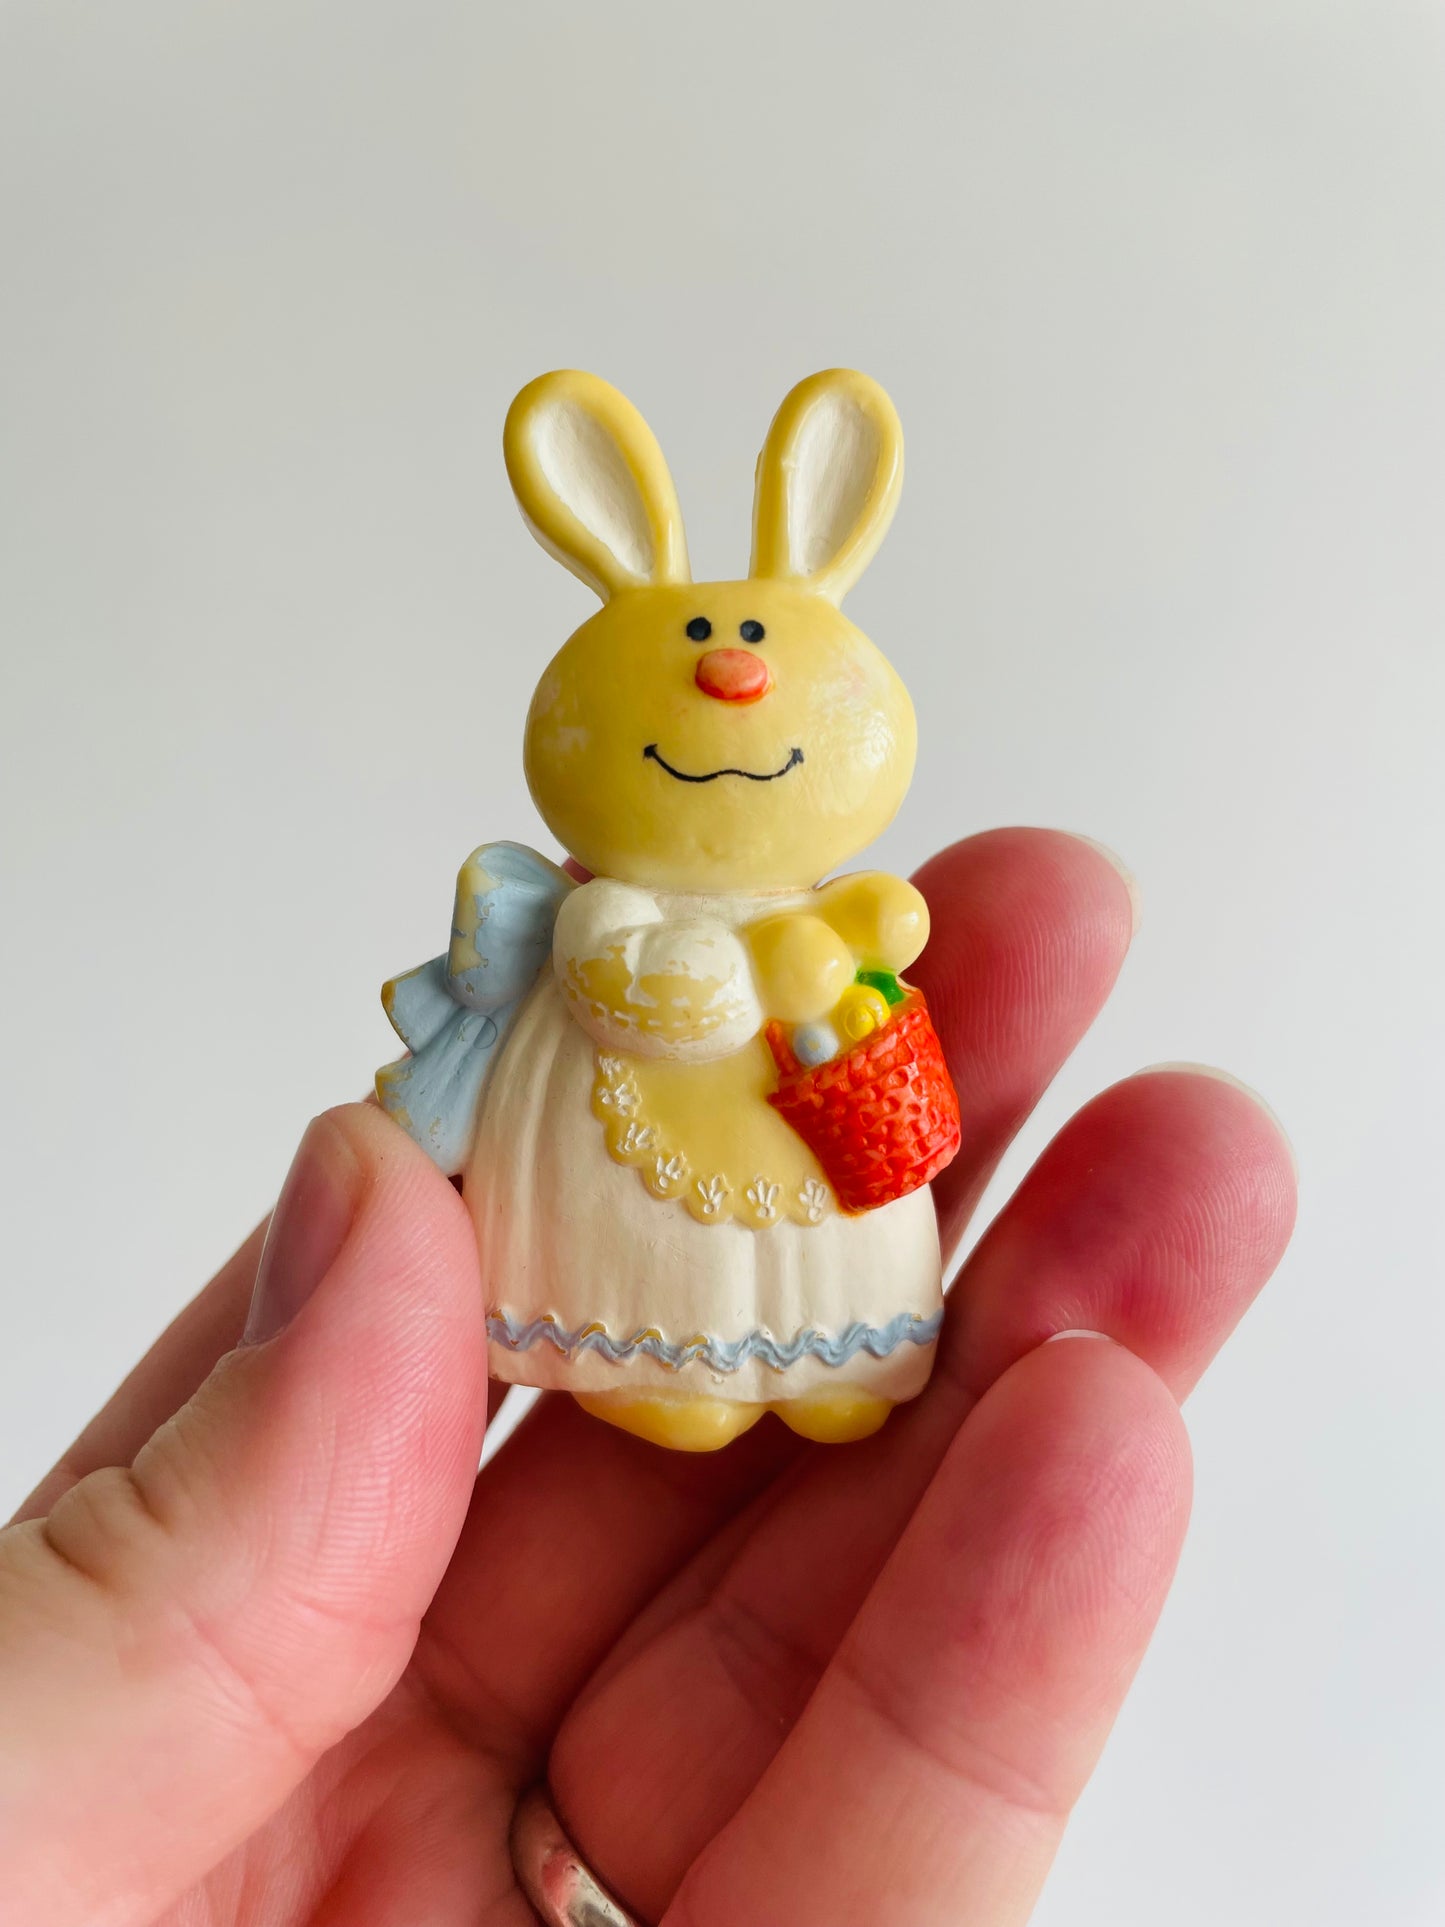 Easter Holiday Pin - Bunny in Dress with Basket of Eggs - Hallmark Cards 1975